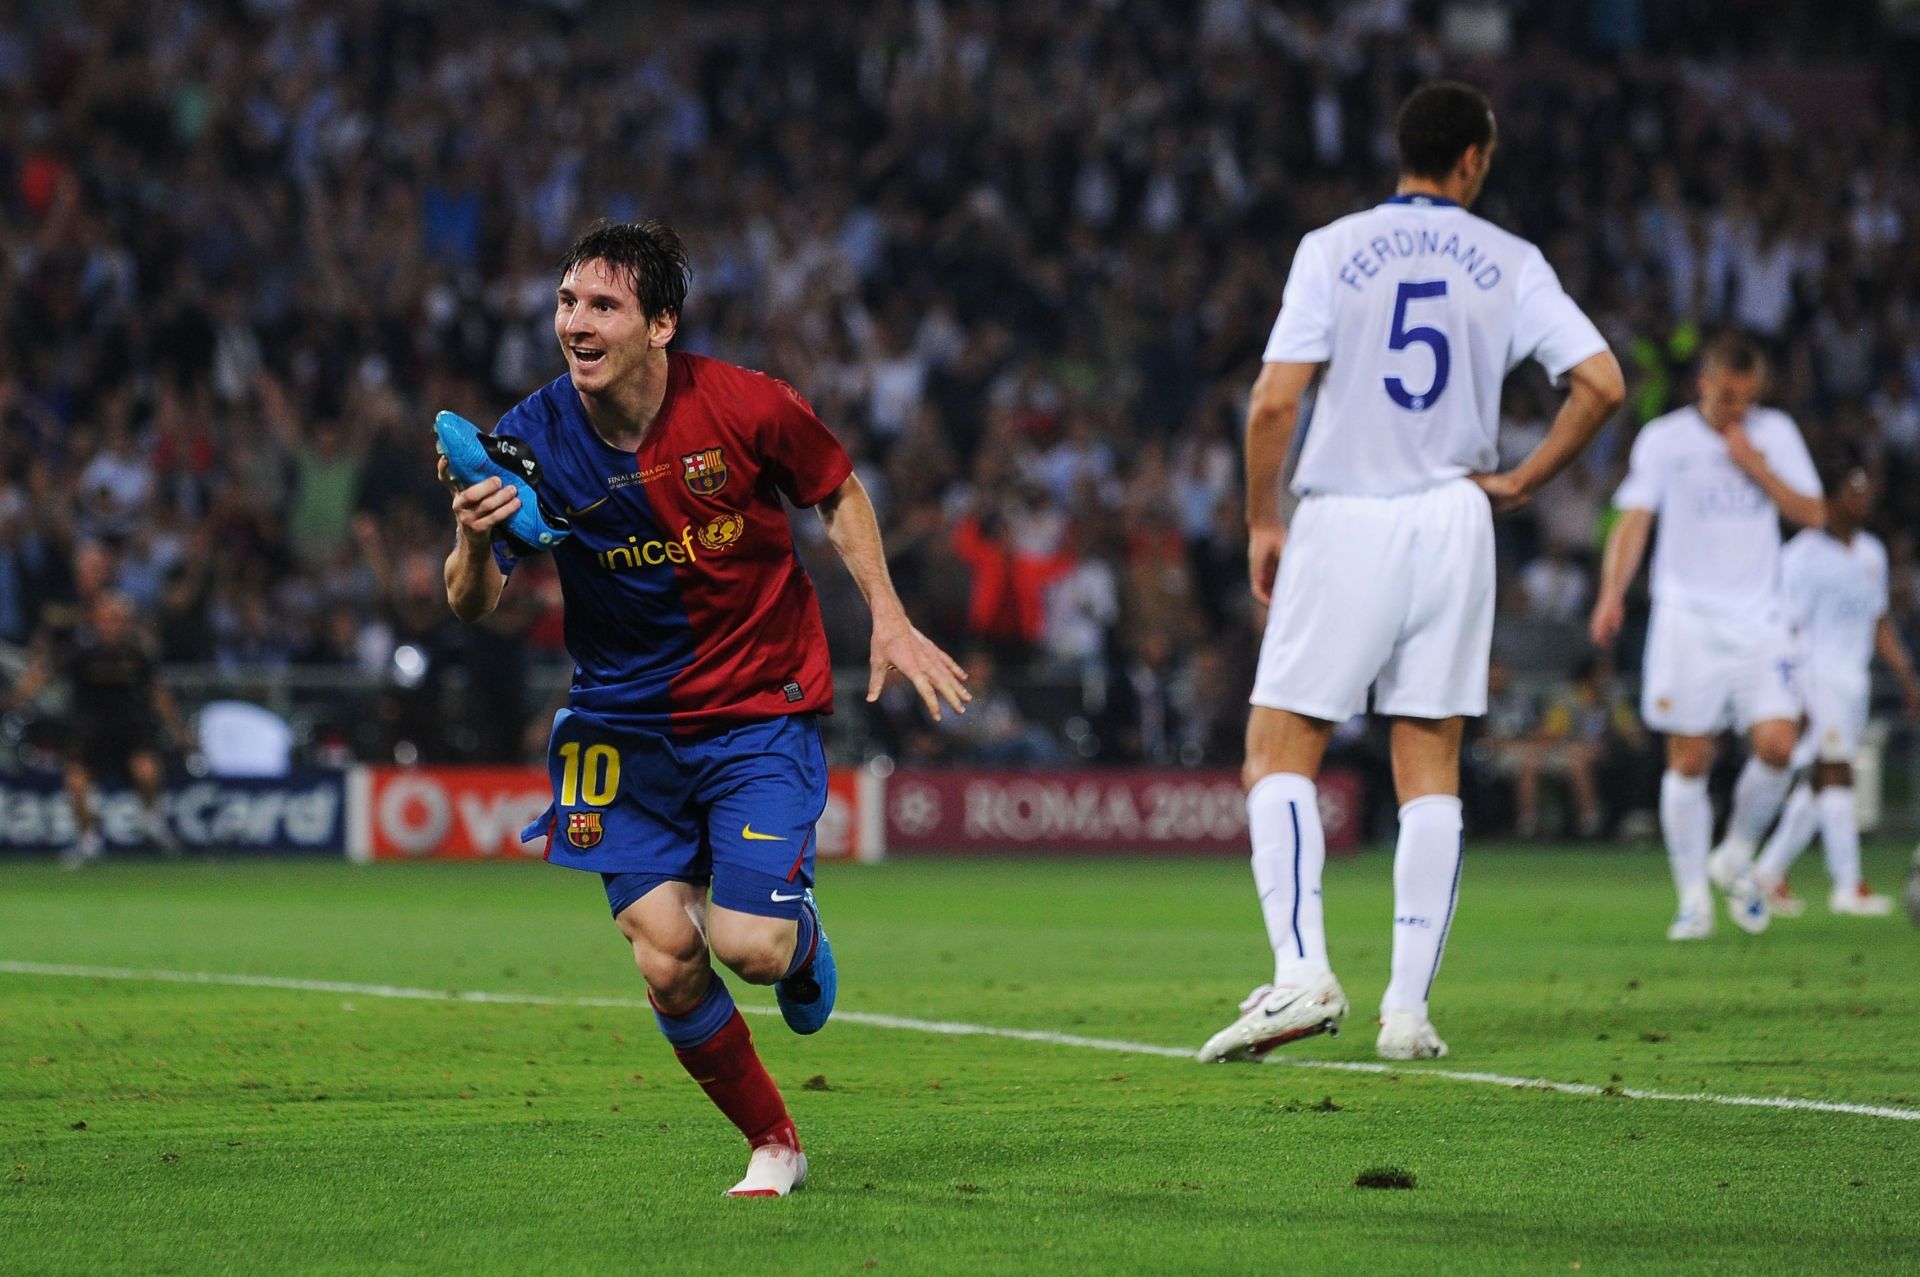 Lionel Messi is one of the greatest football players of all-time.